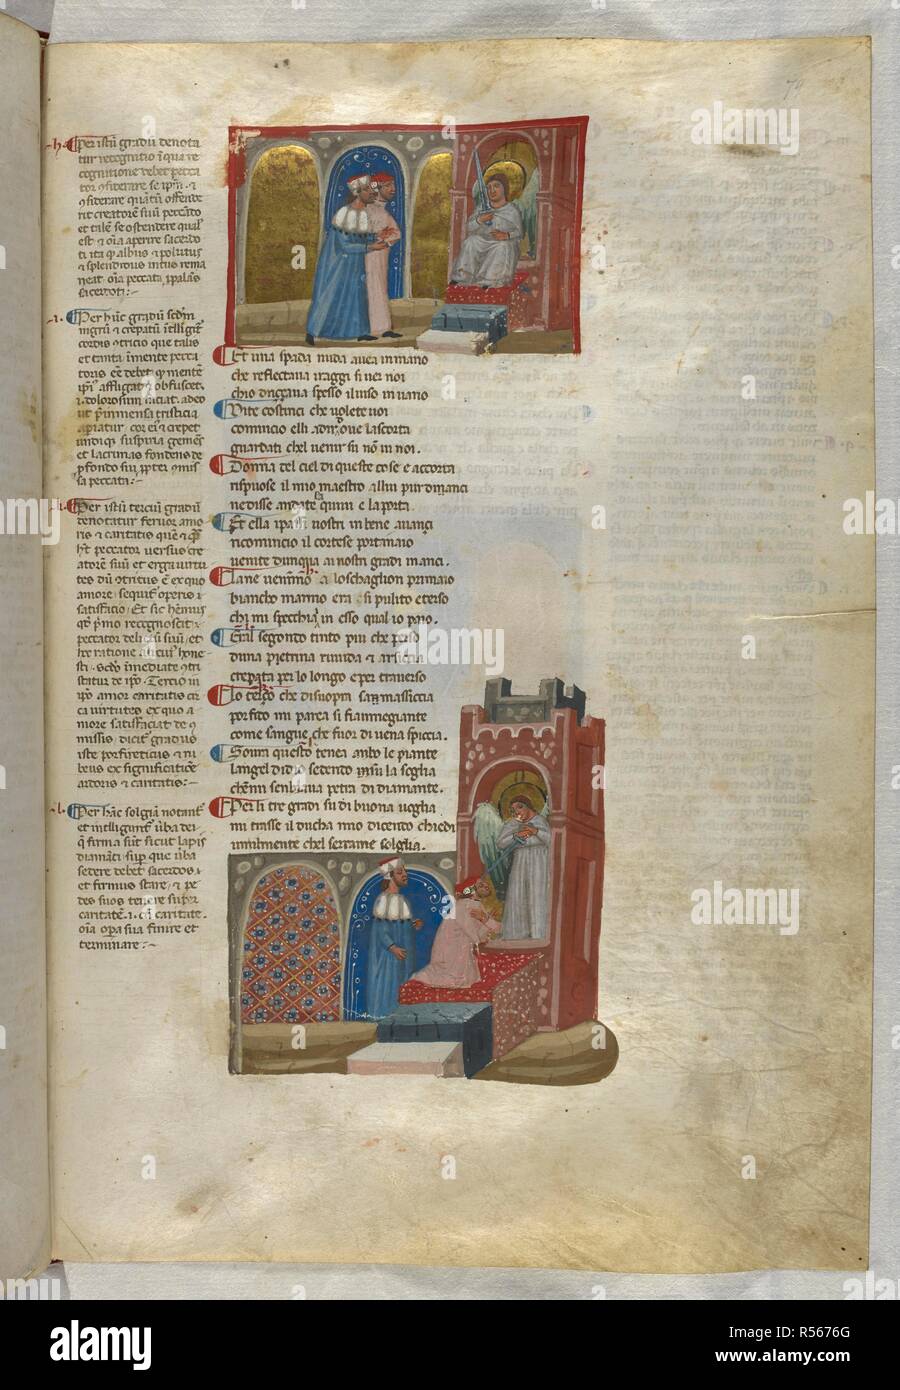 Purgatorio: The angel opens the door to purgatory and Dante kneels on the steps. Dante Alighieri, Divina Commedia ( The Divine Comedy ), with a commentary in Latin. 1st half of the 14th century. Source: Egerton 943, f.79v. Language: Italian, Latin. Stock Photo